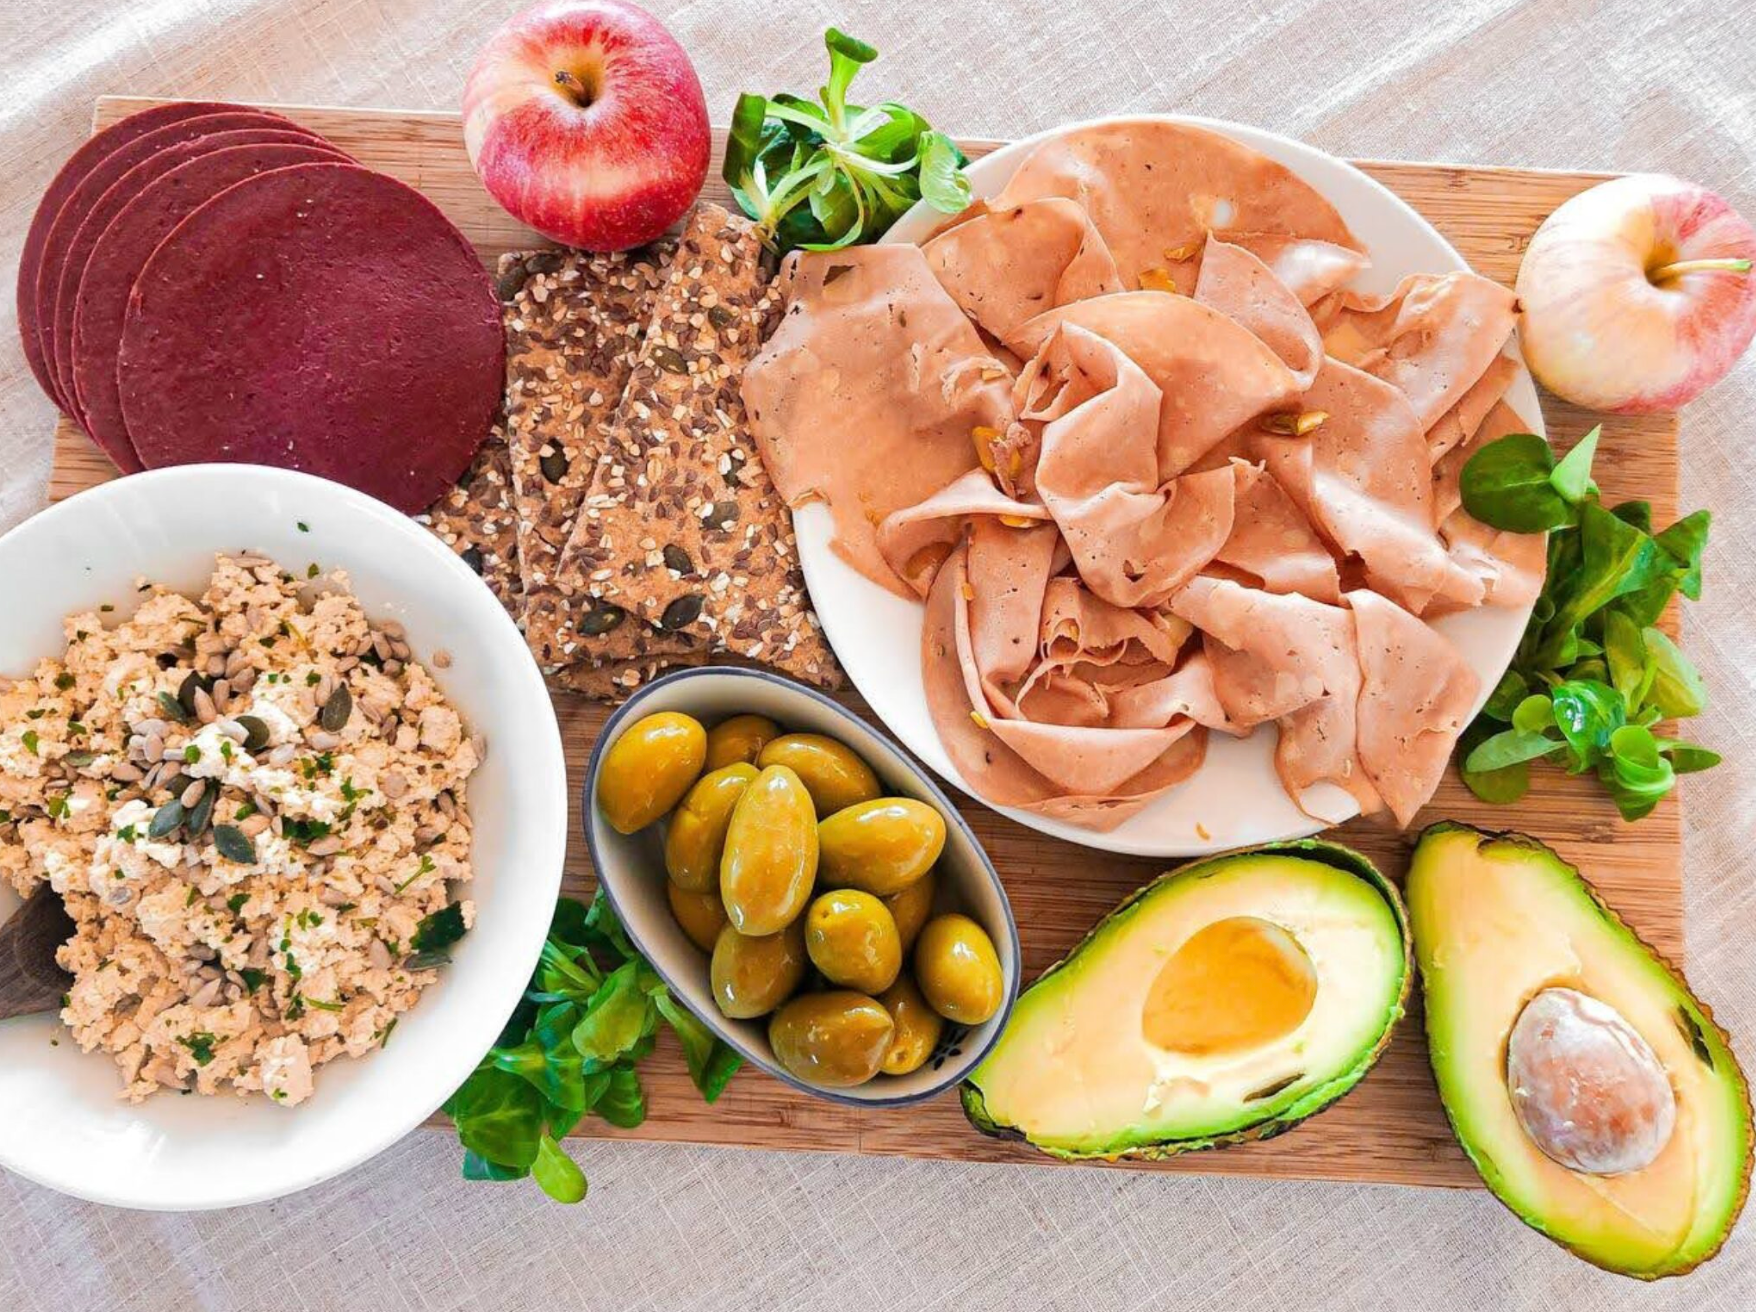 spread of plant meats with avocado, olives, and apple